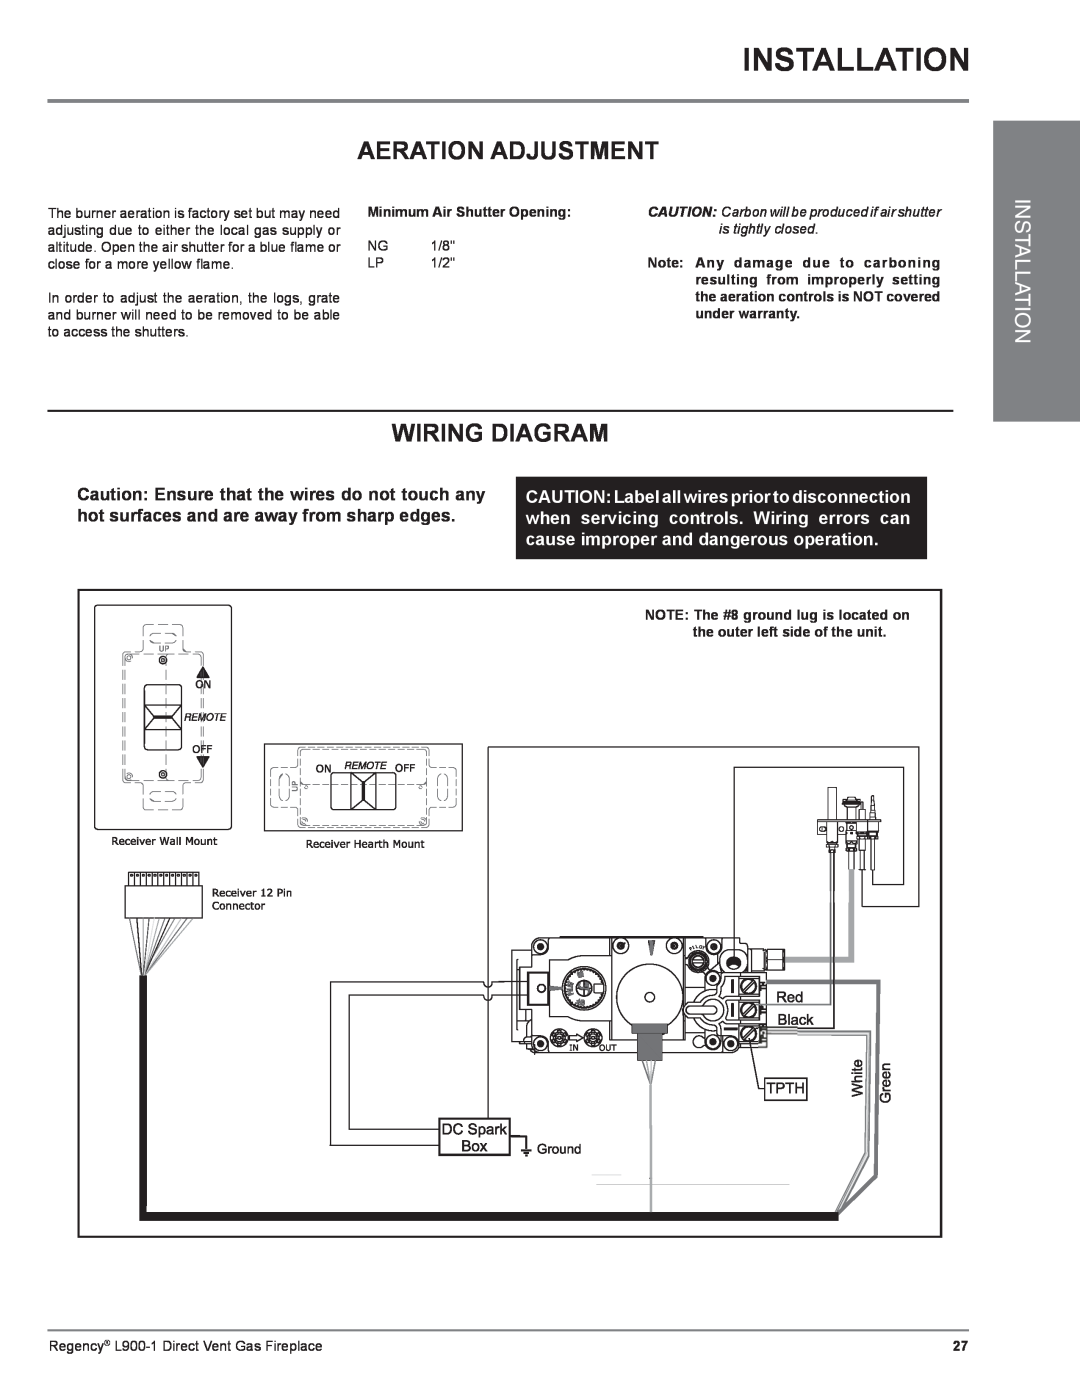 Regency L900-1 Installation, Aeration Adjustment, Wiring Diagram, CAUTION: Label all wires prior to disconnection 